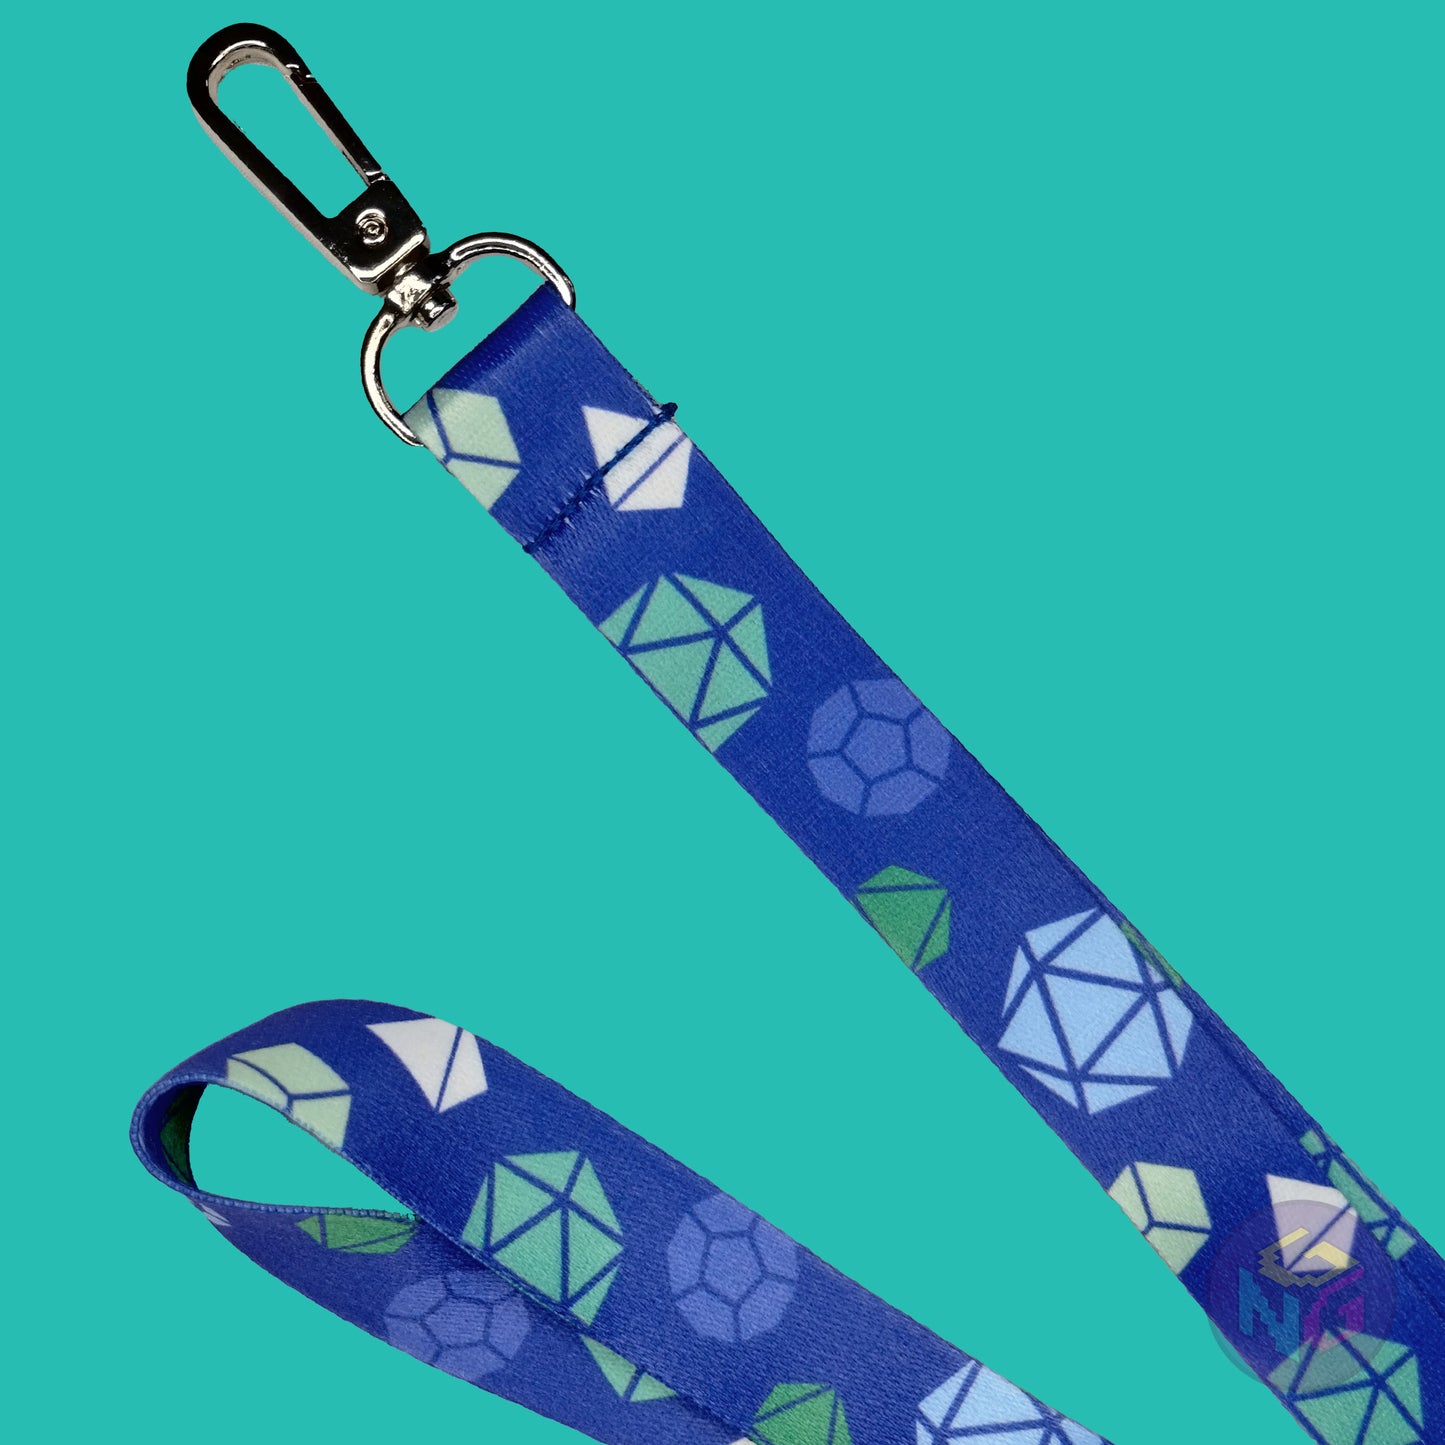 close up detail of the gay dungeons and dragons lanyard showing the lobster clasp, green d20s, blue d12s, white d4s, and other dice